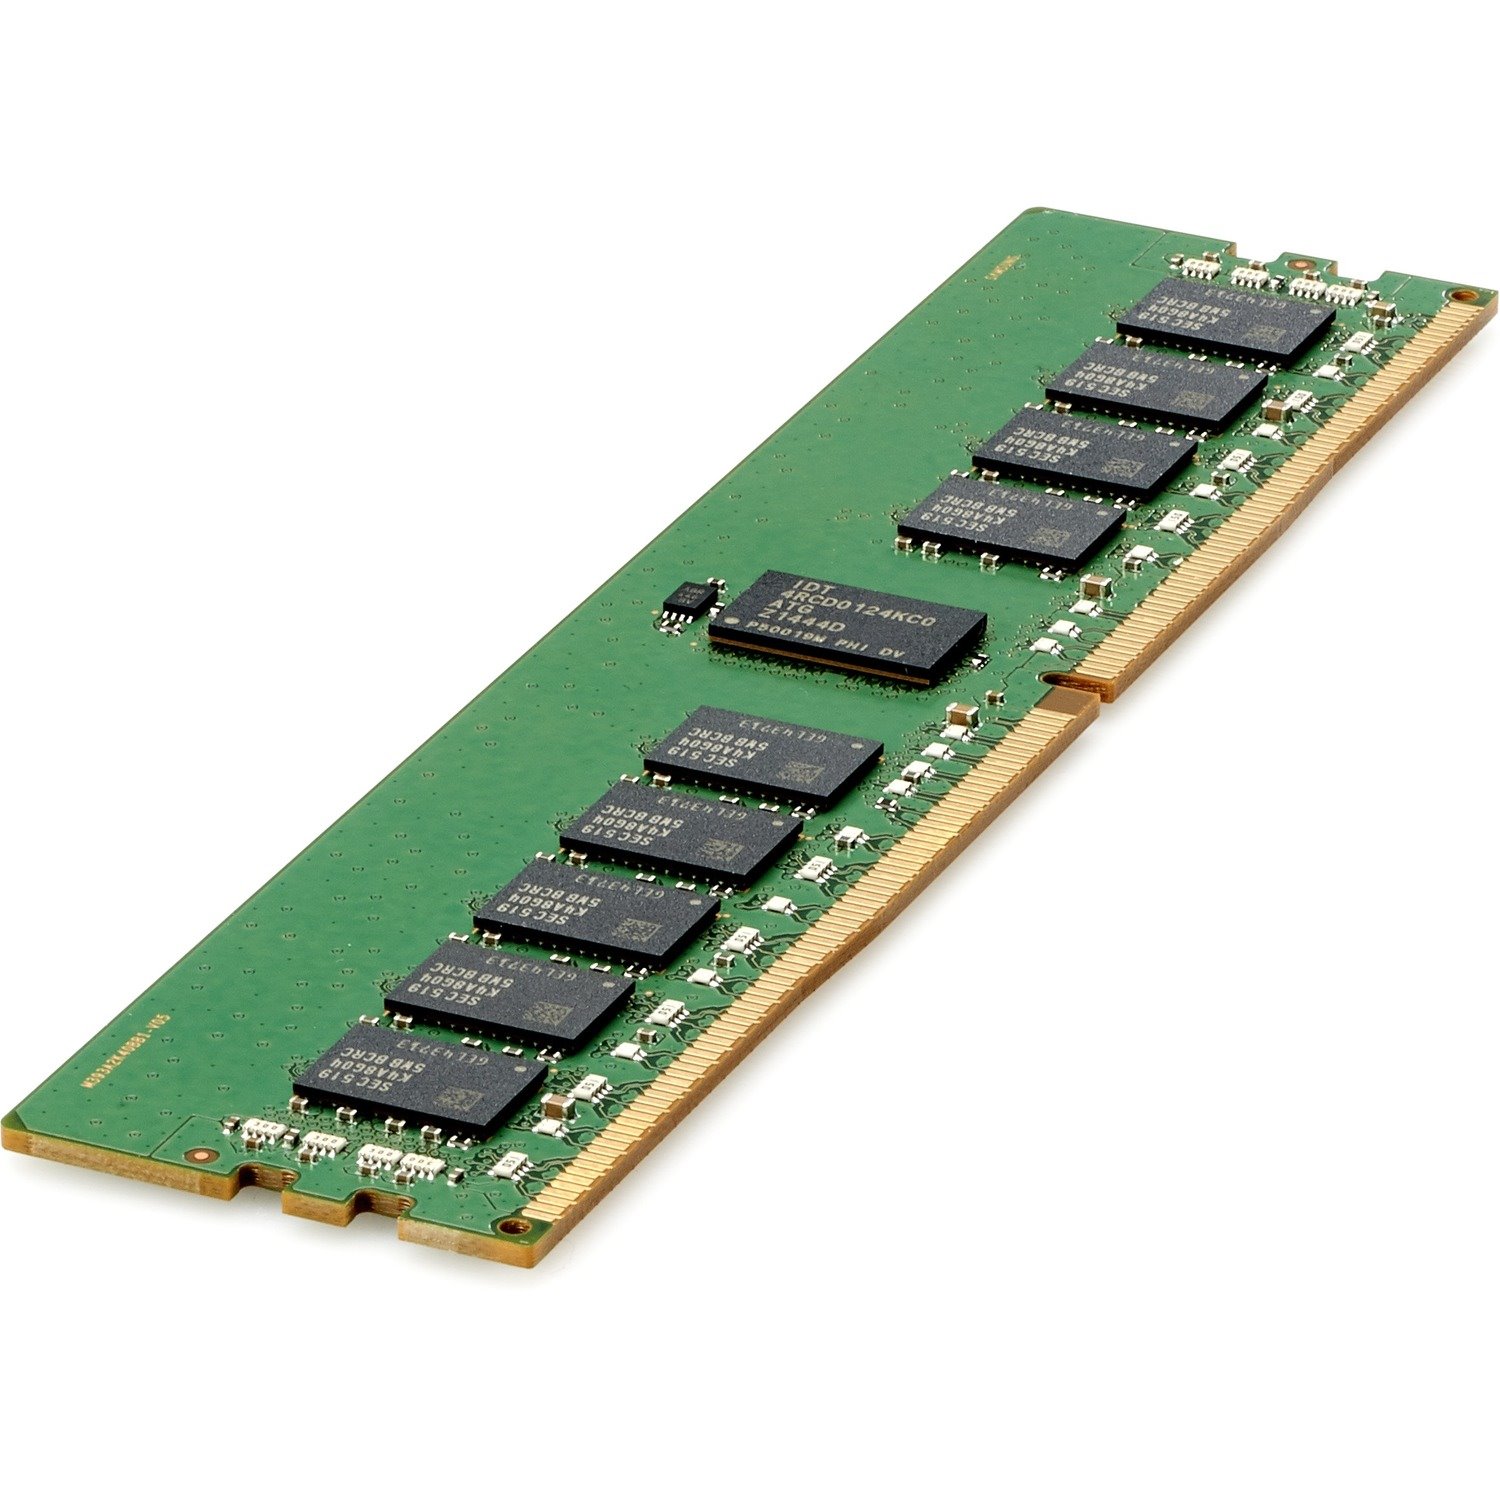 HPE SmartMemory RAM Module for Server - 8 GB (1 x 8GB) - DDR4-2933/PC4-23466 DDR4 SDRAM - 2933 MHz - CL21 - 1.20 V